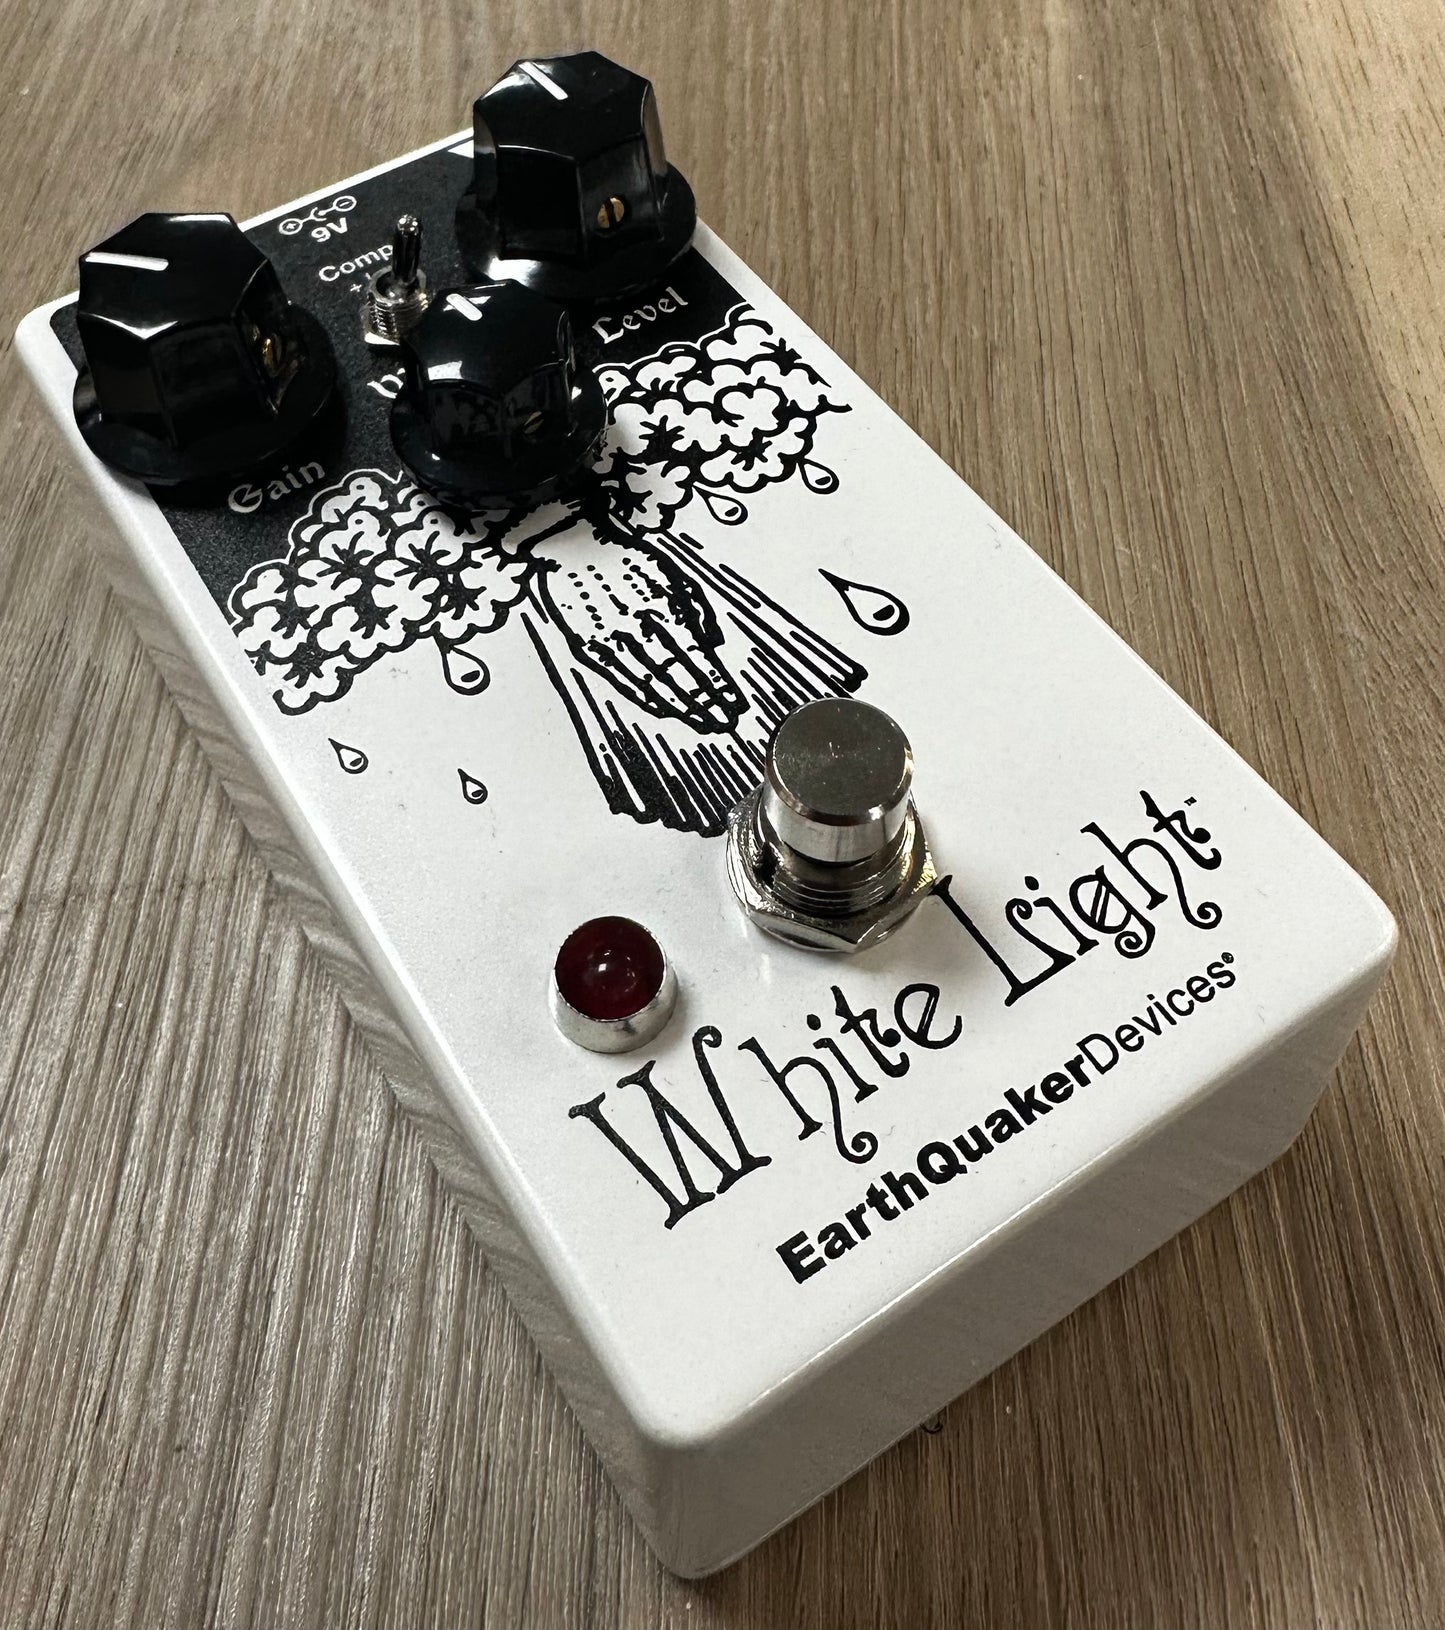 Used Earthquaker Devices White Light Reissue Overdrive Pedal w/box TSS2623